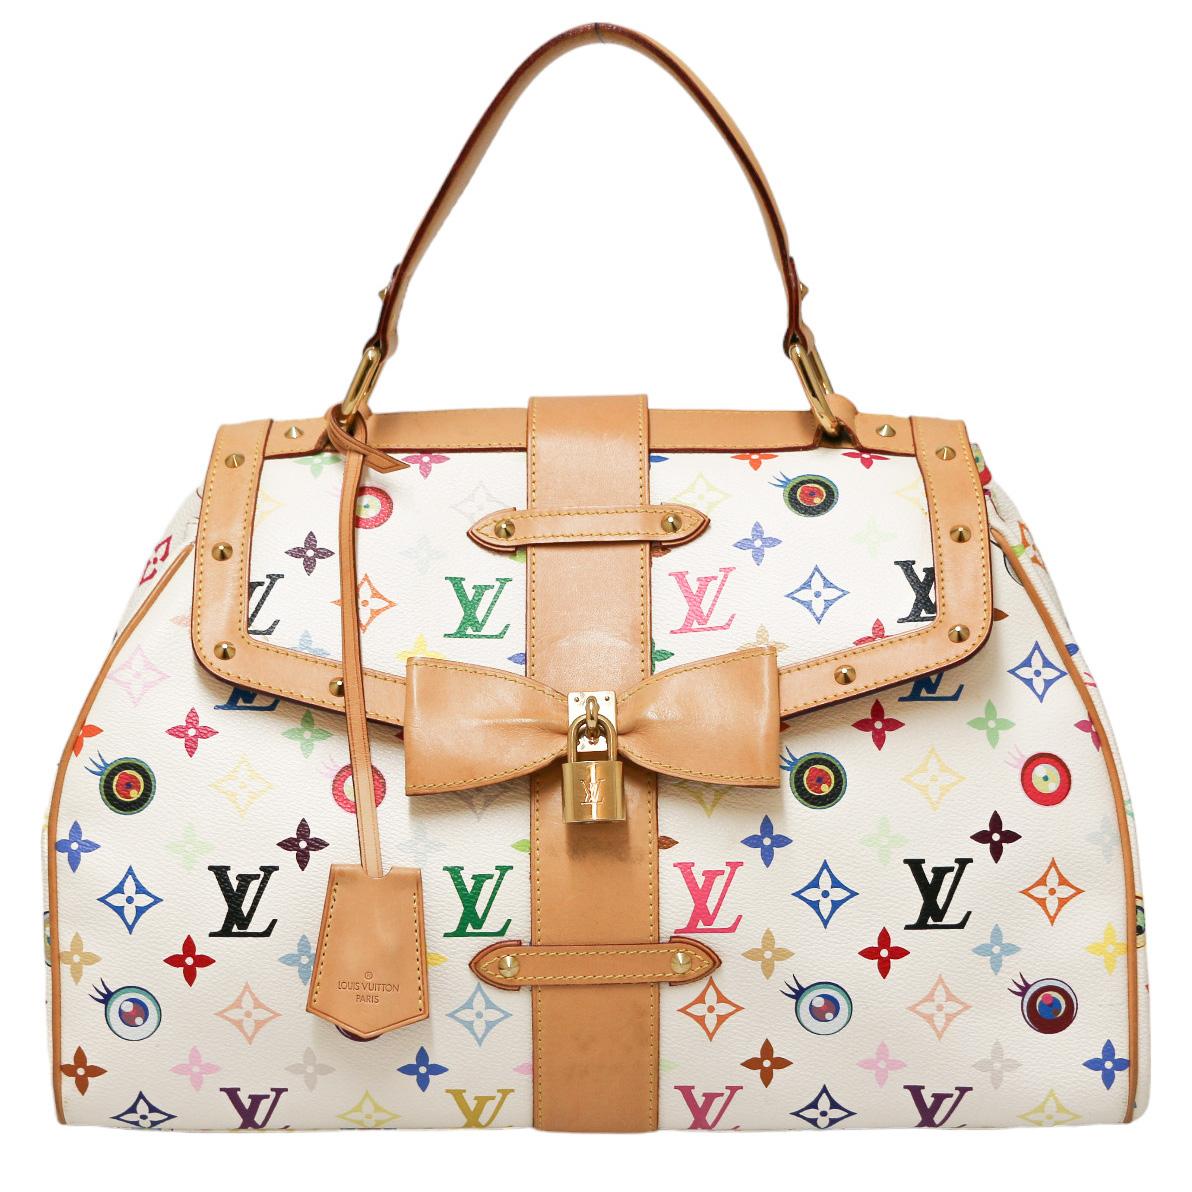 Limited edition n°307, incredible Murakami LOUIS VUITTON white bag

Condition: very good
Made in Spain
Collection: Eye Love You
Materials: white coated canvas 